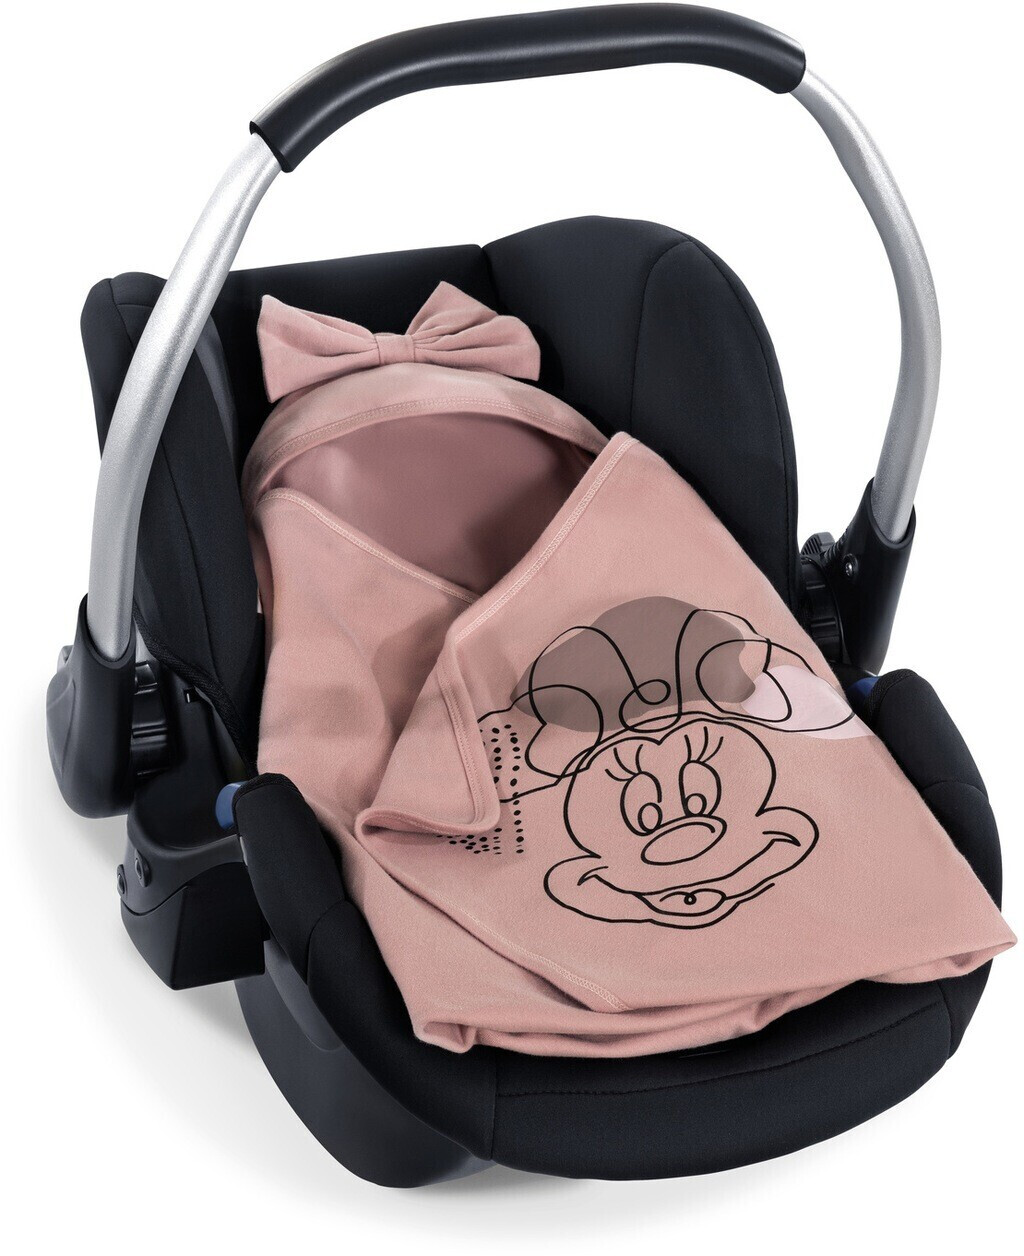 Hauck Snuggle N Dream Minnie Mouse rose ab 44,90 €